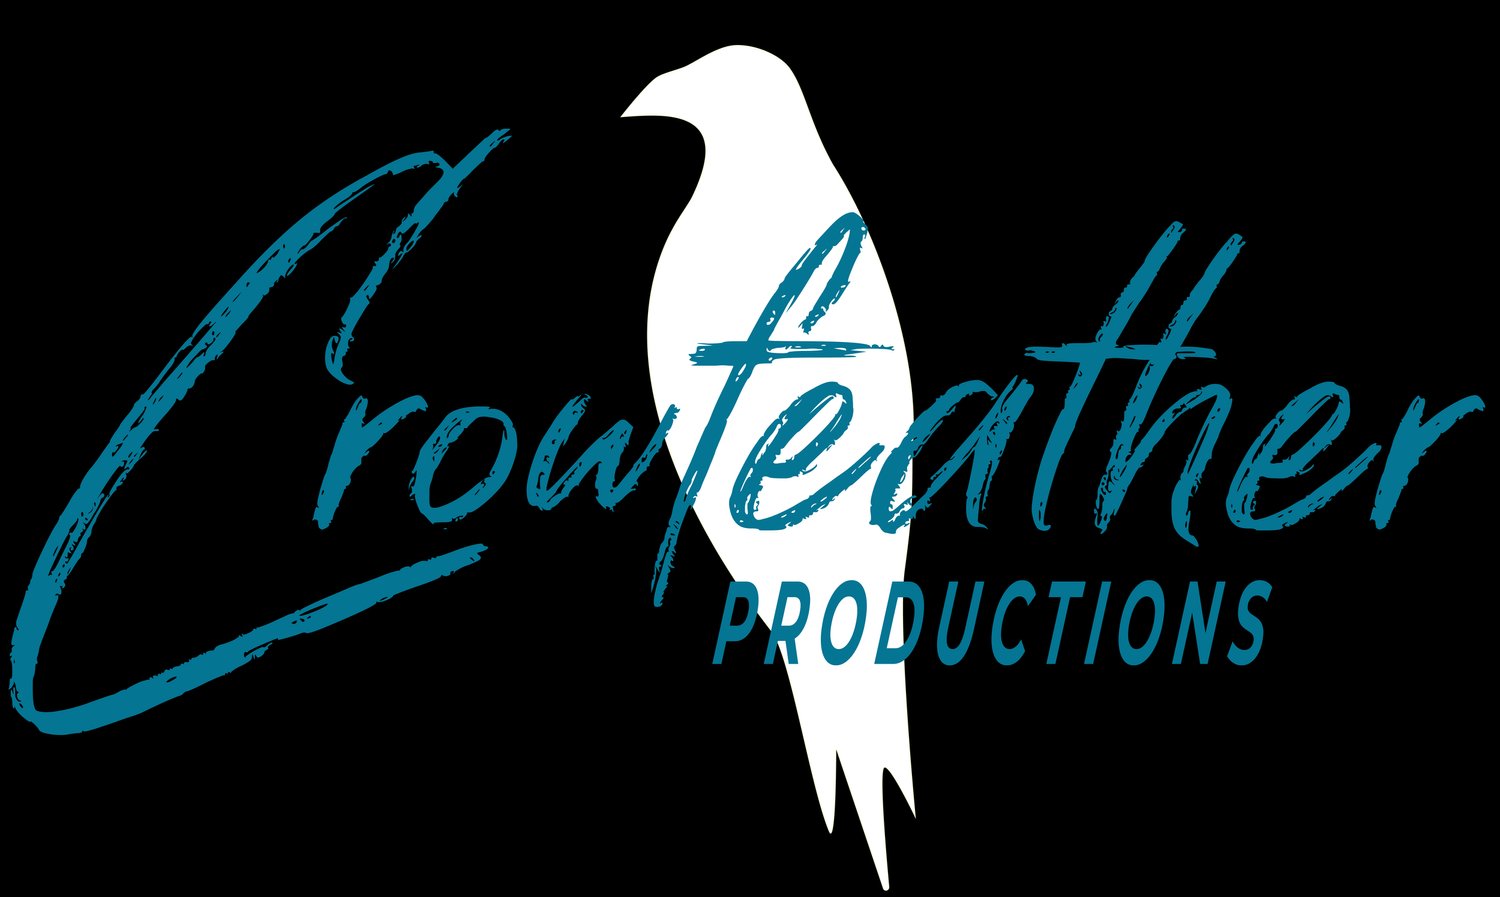 Crowfeather Productions